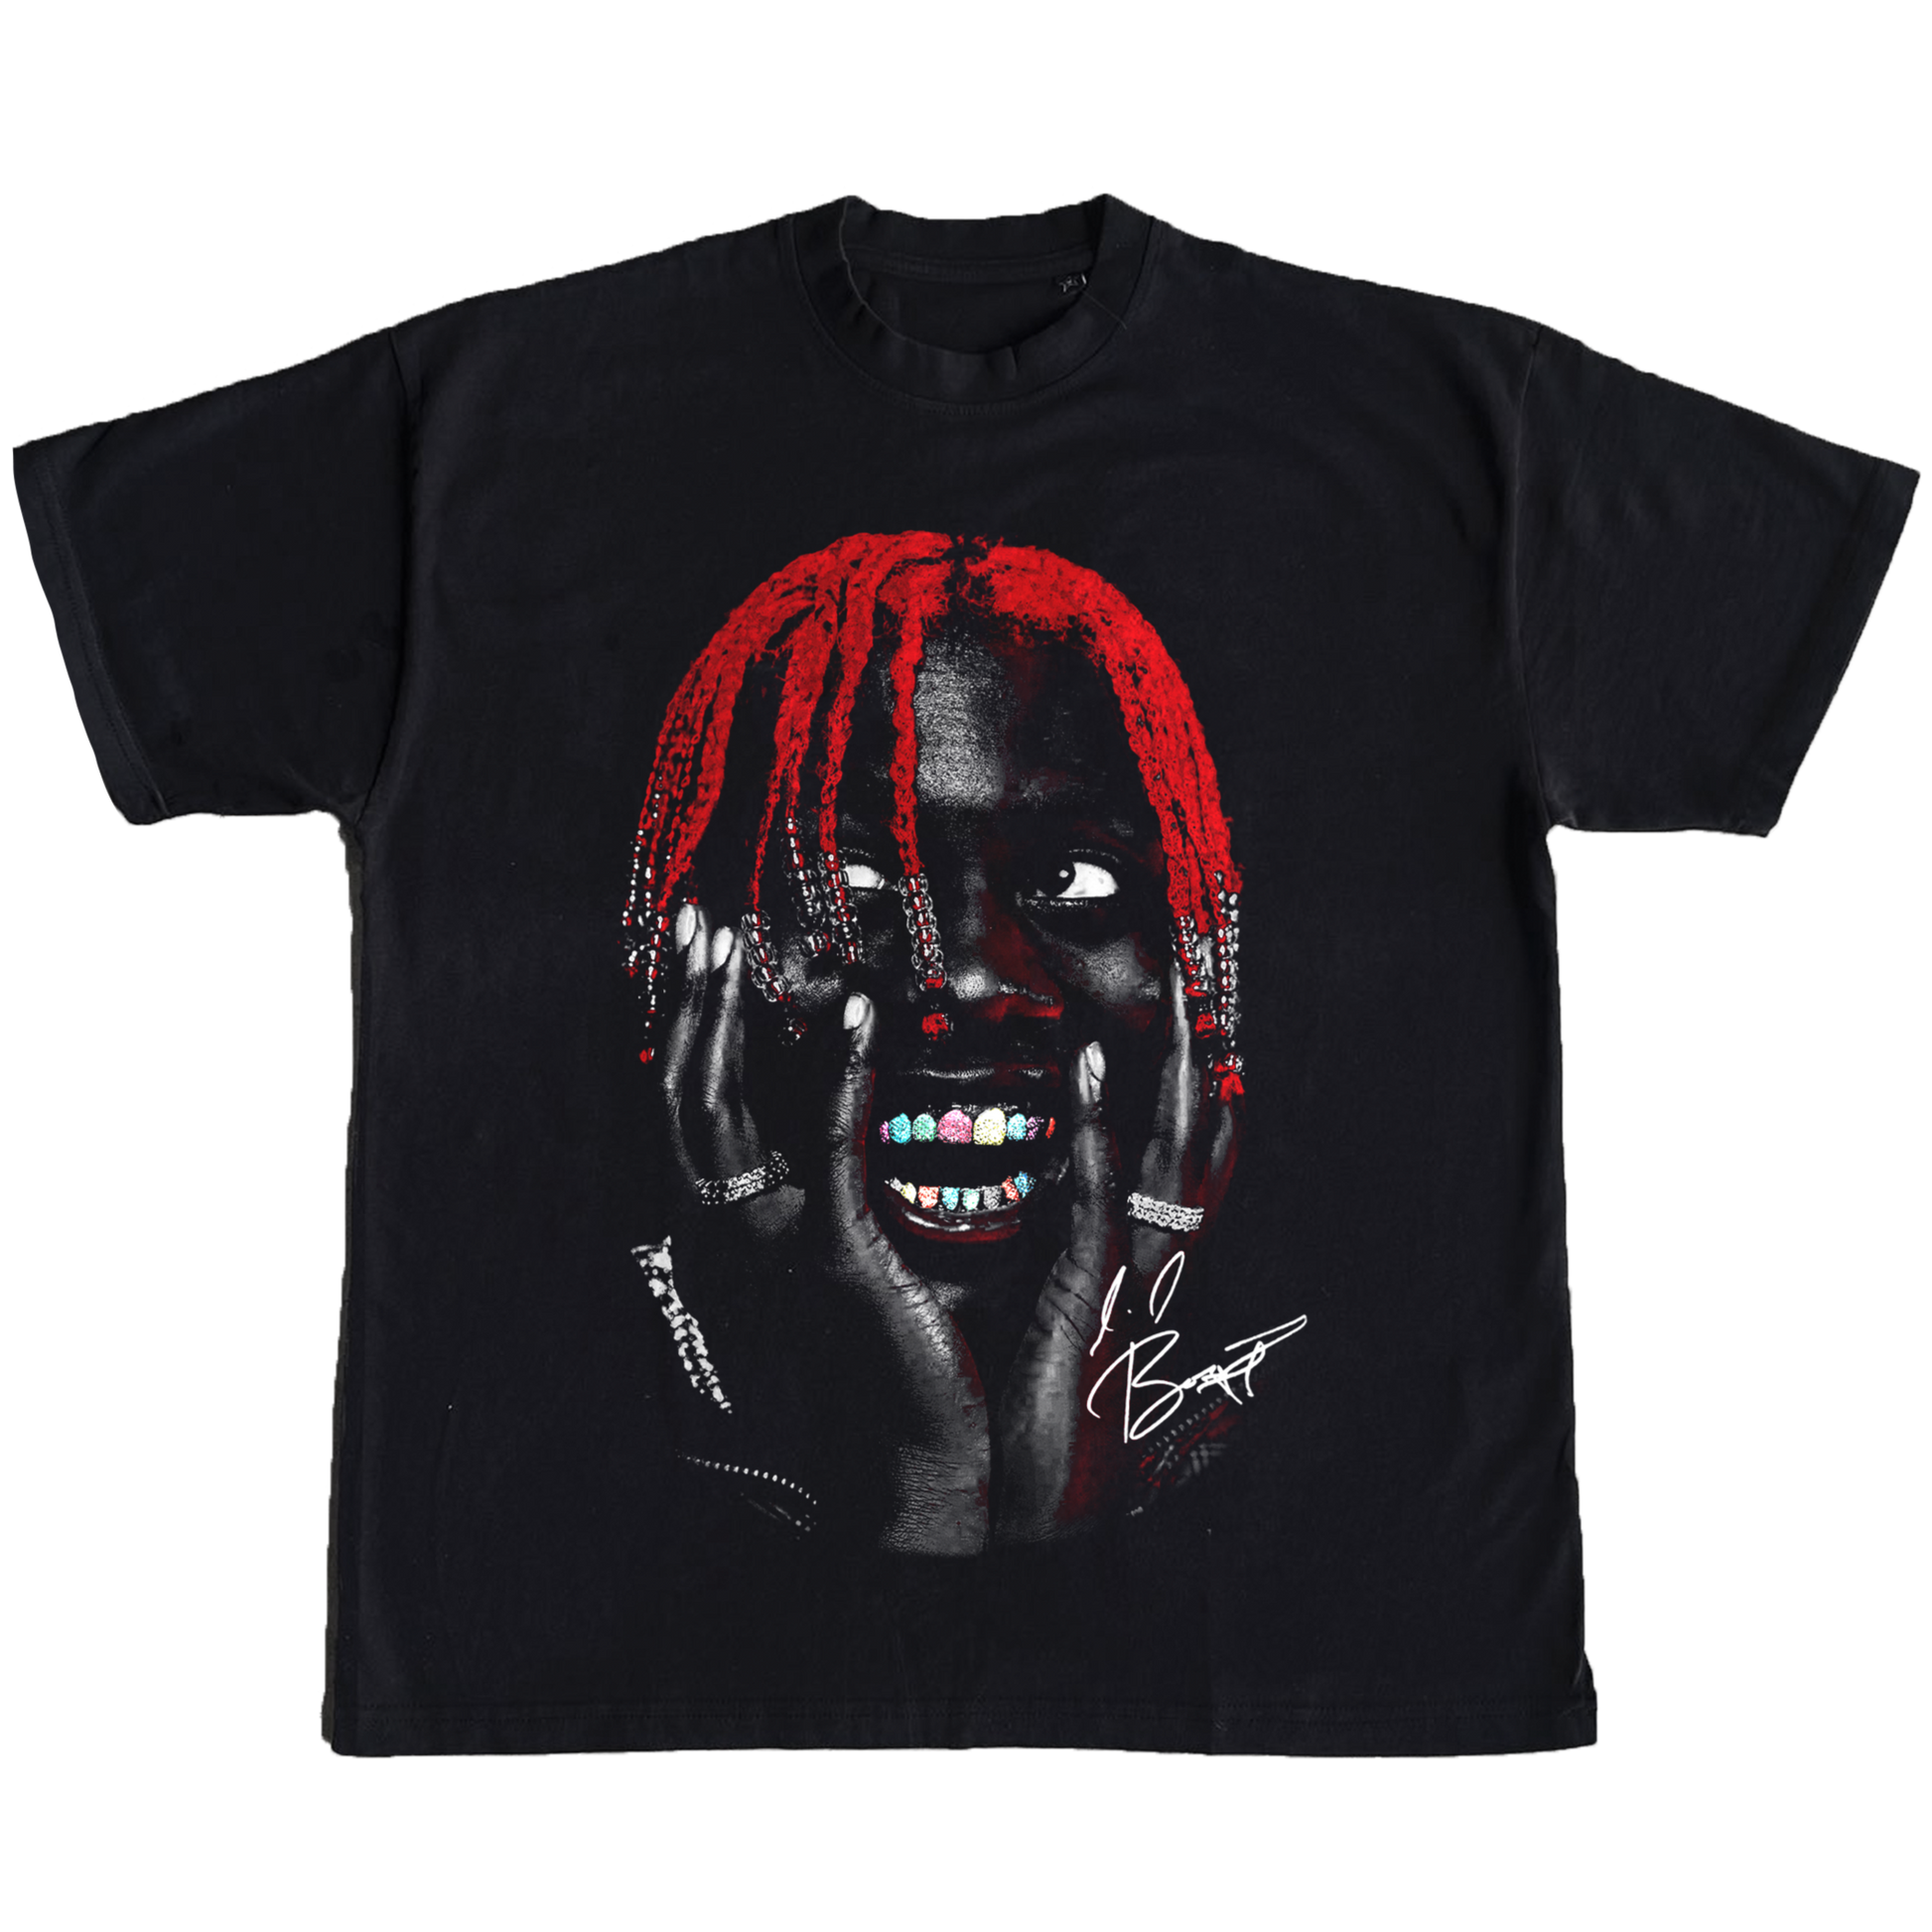 Lil Yachty Bootleg Rap Tee - A hip hop-inspired t-shirt featuring the rap genius of Lil Yachty